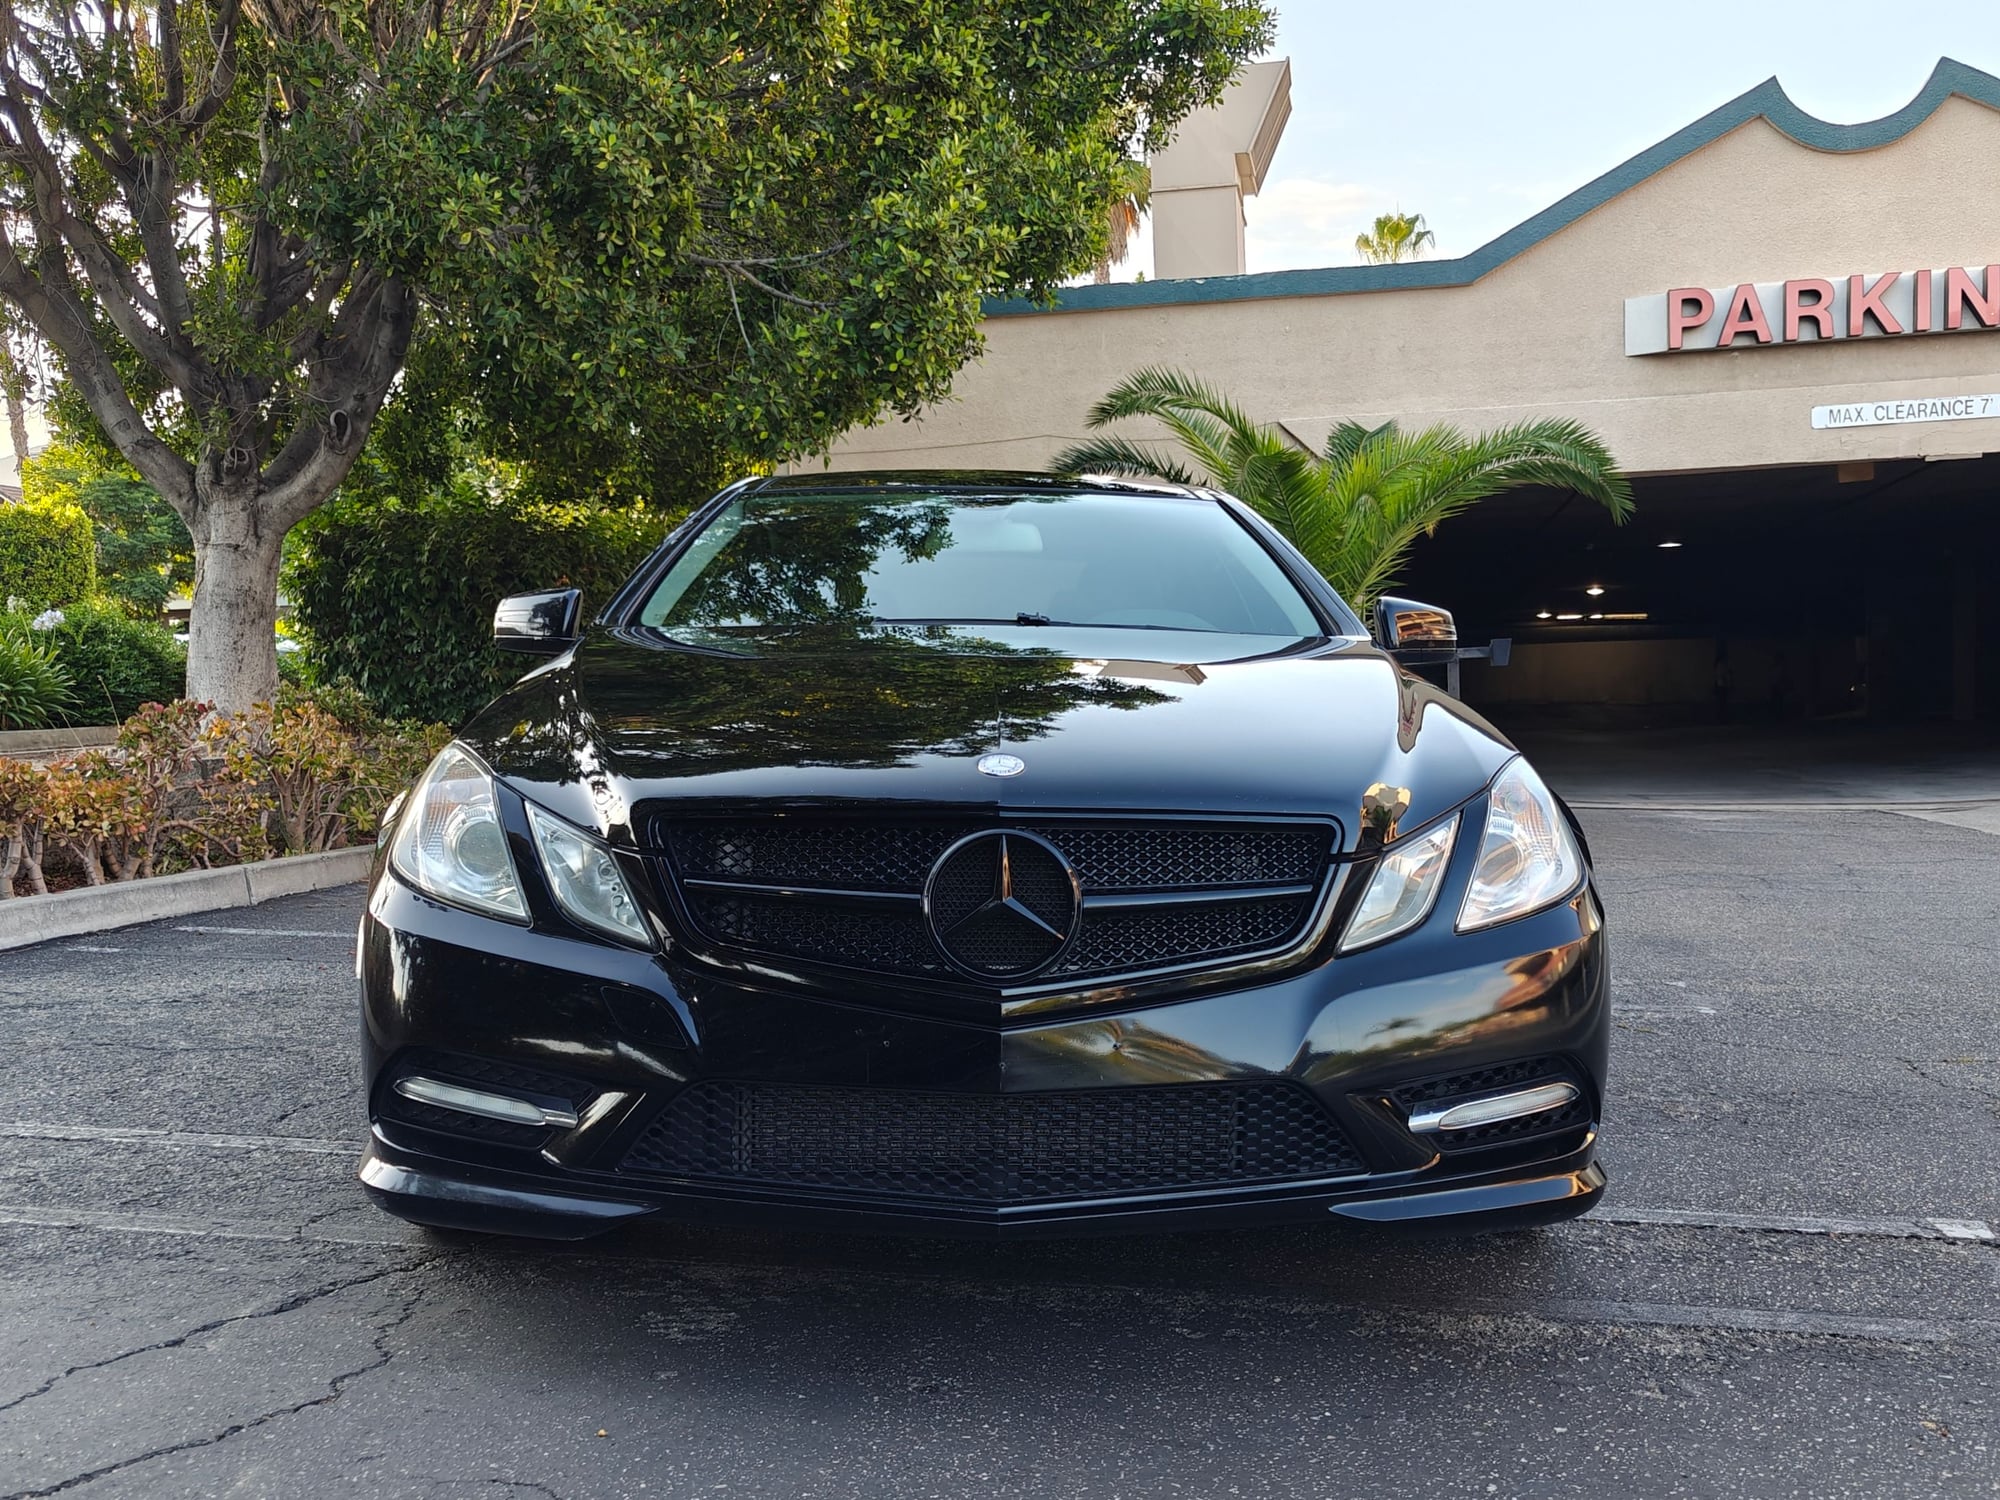 2012 Mercedes-Benz E550 - 2012 MB E550 Coupe - Great Options w/ OEM+ Upgrades - Used - VIN WDDKJ7DB8CF154411 - 114,700 Miles - 8 cyl - 2WD - Automatic - Coupe - Black - Los Angeles, CA 90015, United States